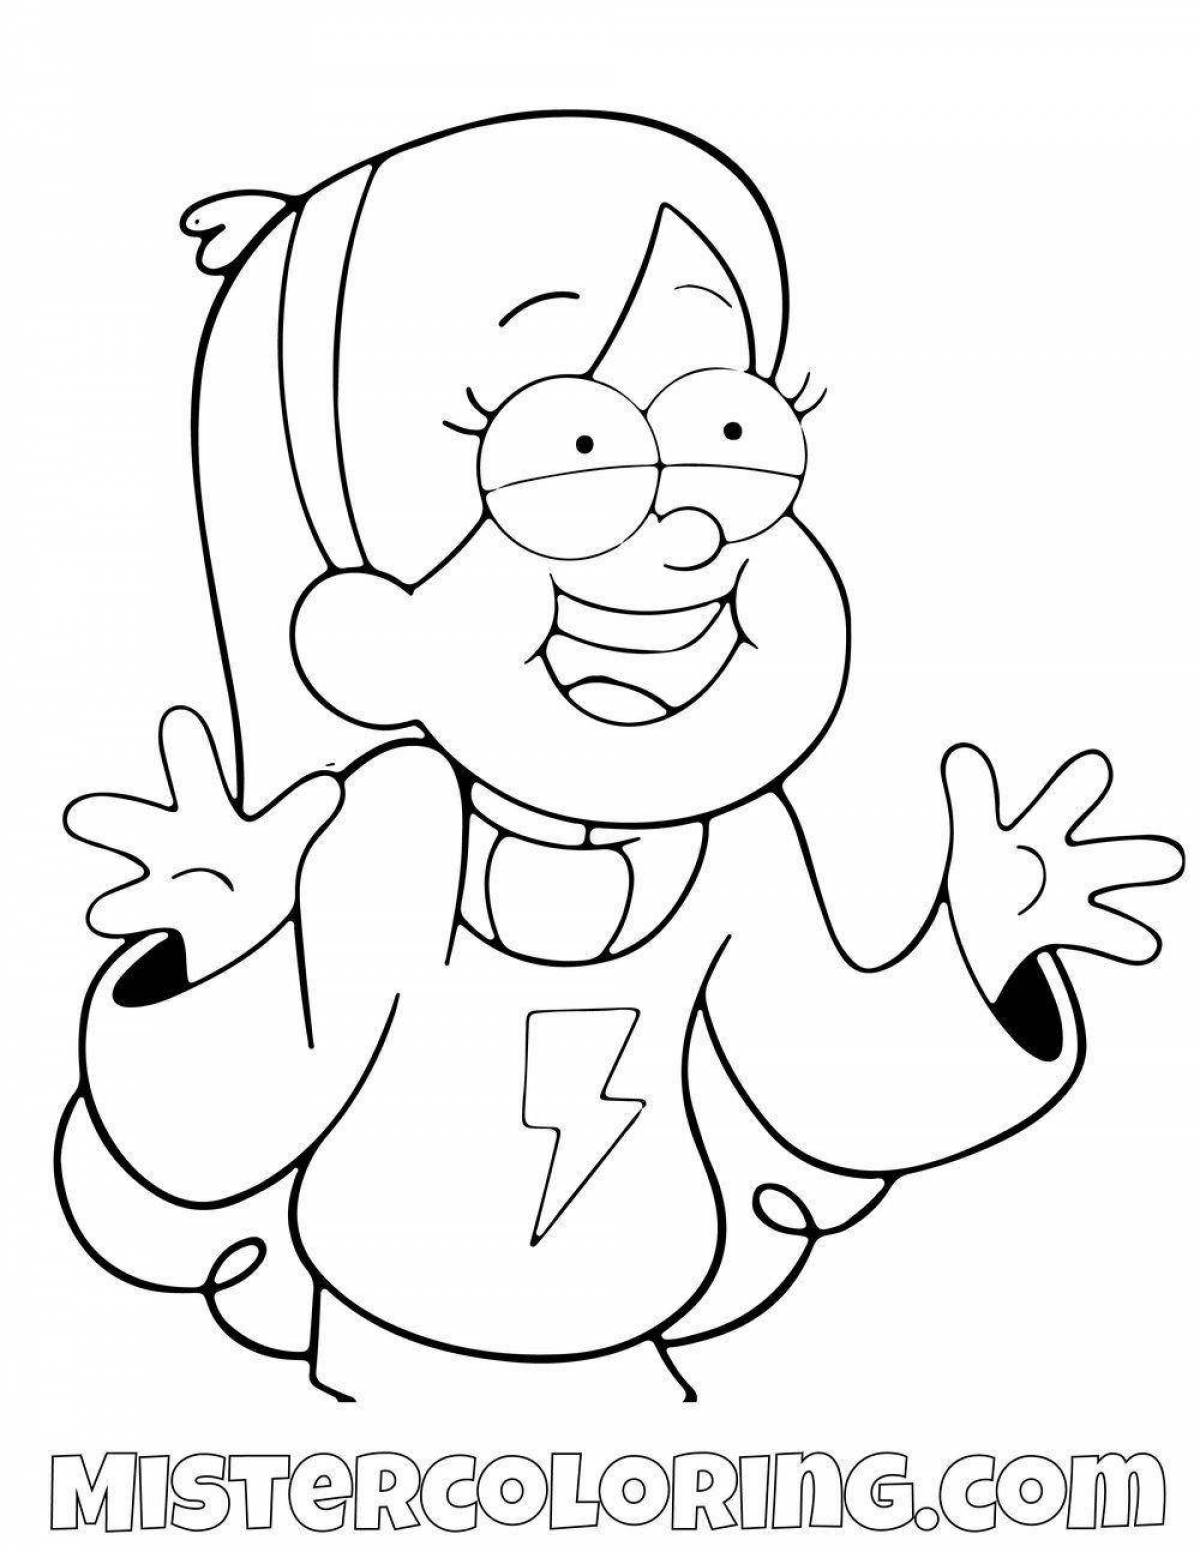 Gravity falls piggy coloring page